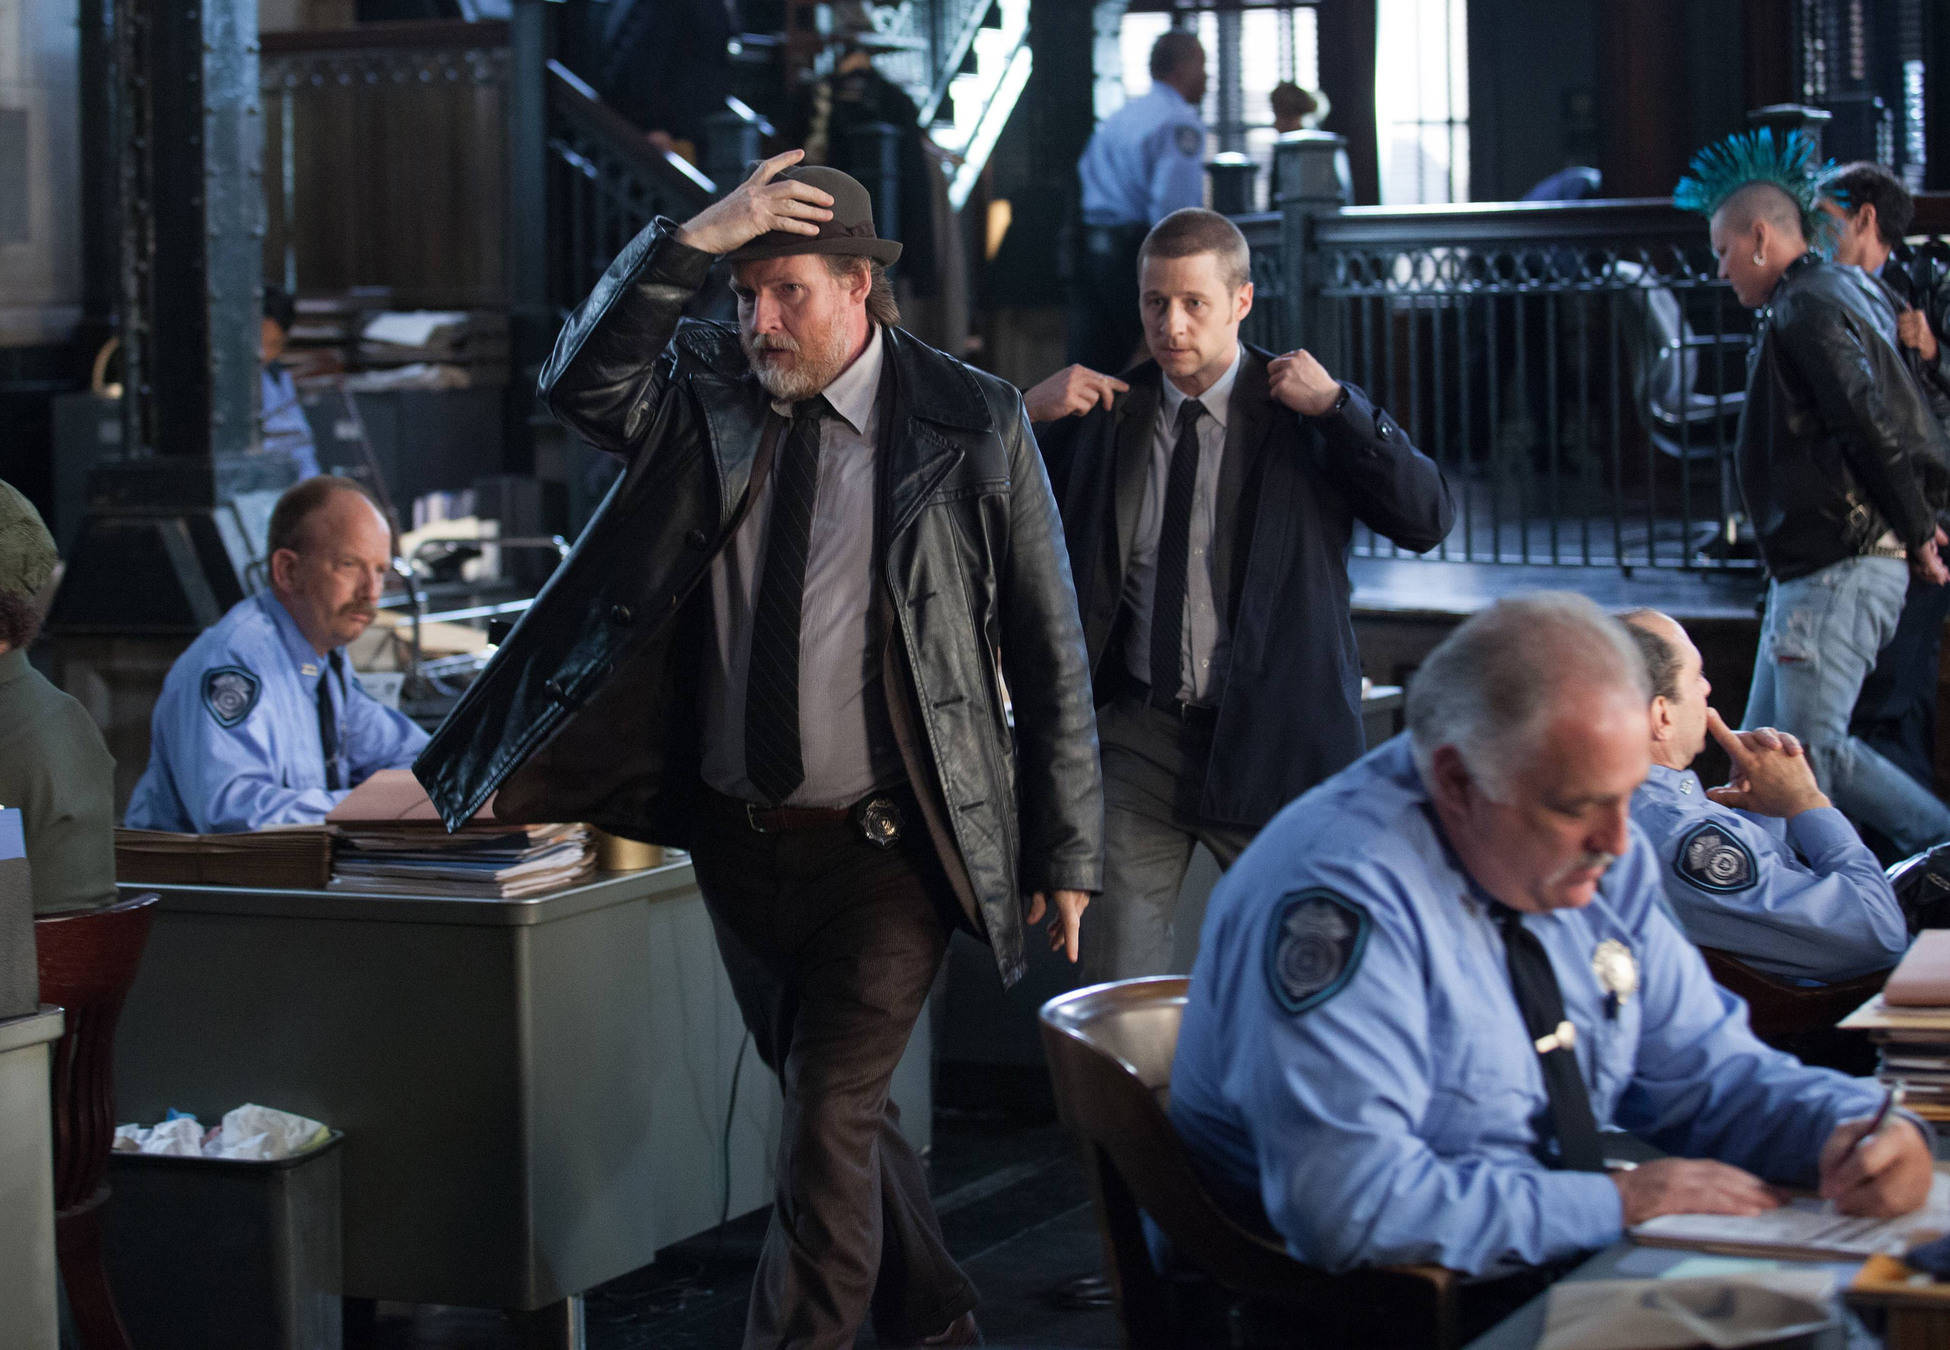 GOTHAM: Detectives Harvey Bullock (Donal Logue, L) and James Gordon (Ben McKenzie, R) leave the GCPD princint in the "The Balloonman" episode of GOTHAM airing Monday, Oct. 6 (8:00-9:00 PM ET/PT) on FOX. Â©2014 Fox Broadcasting Co. Cr: Jessica Miglio/FOX